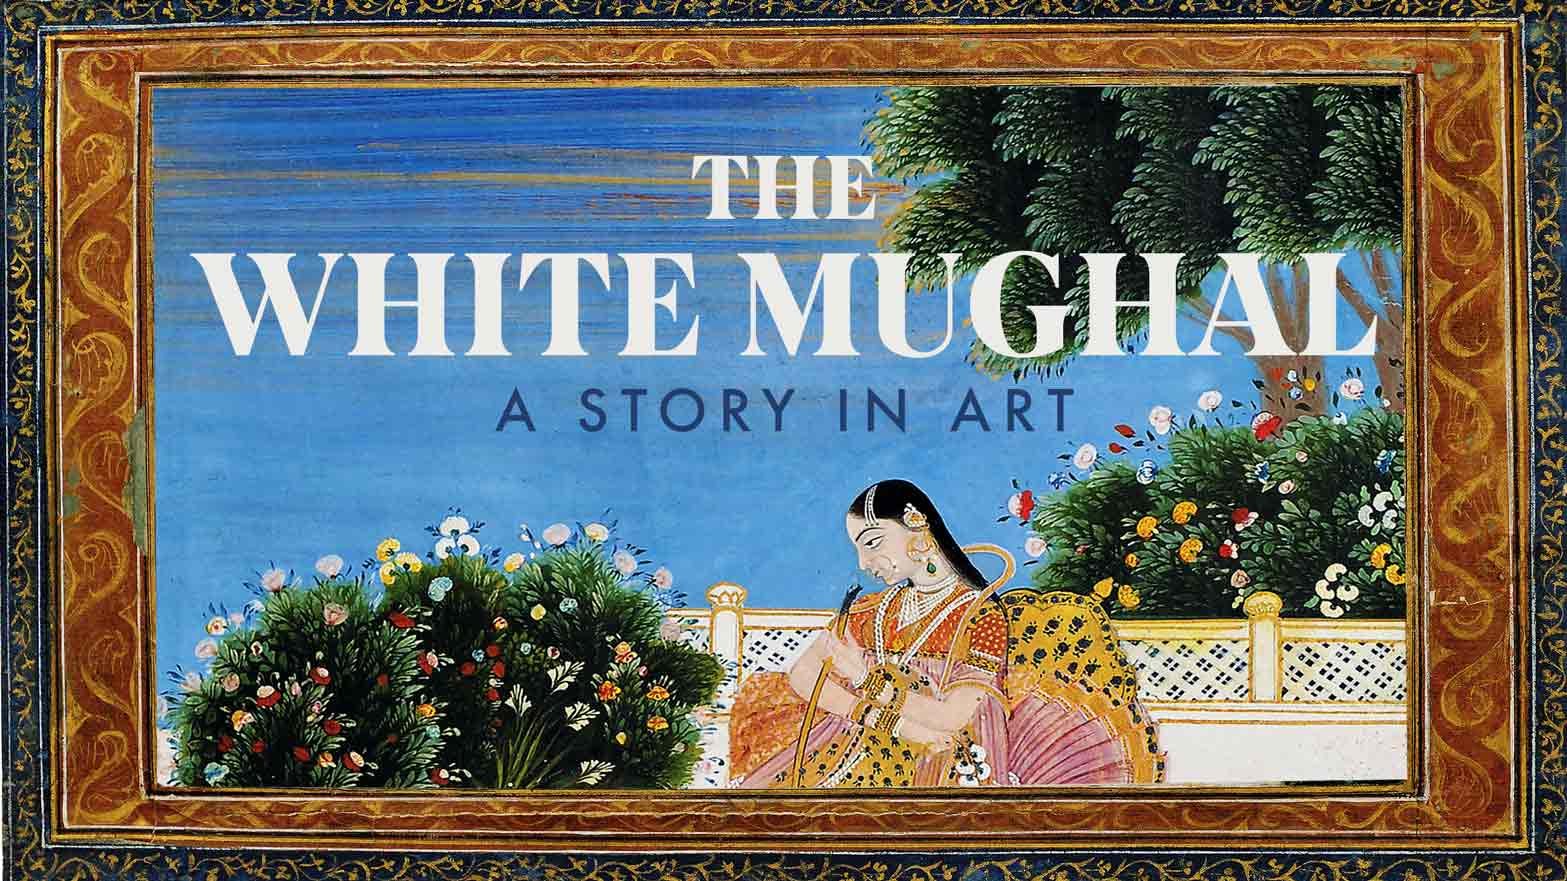 The White Mughal: A Story In Art